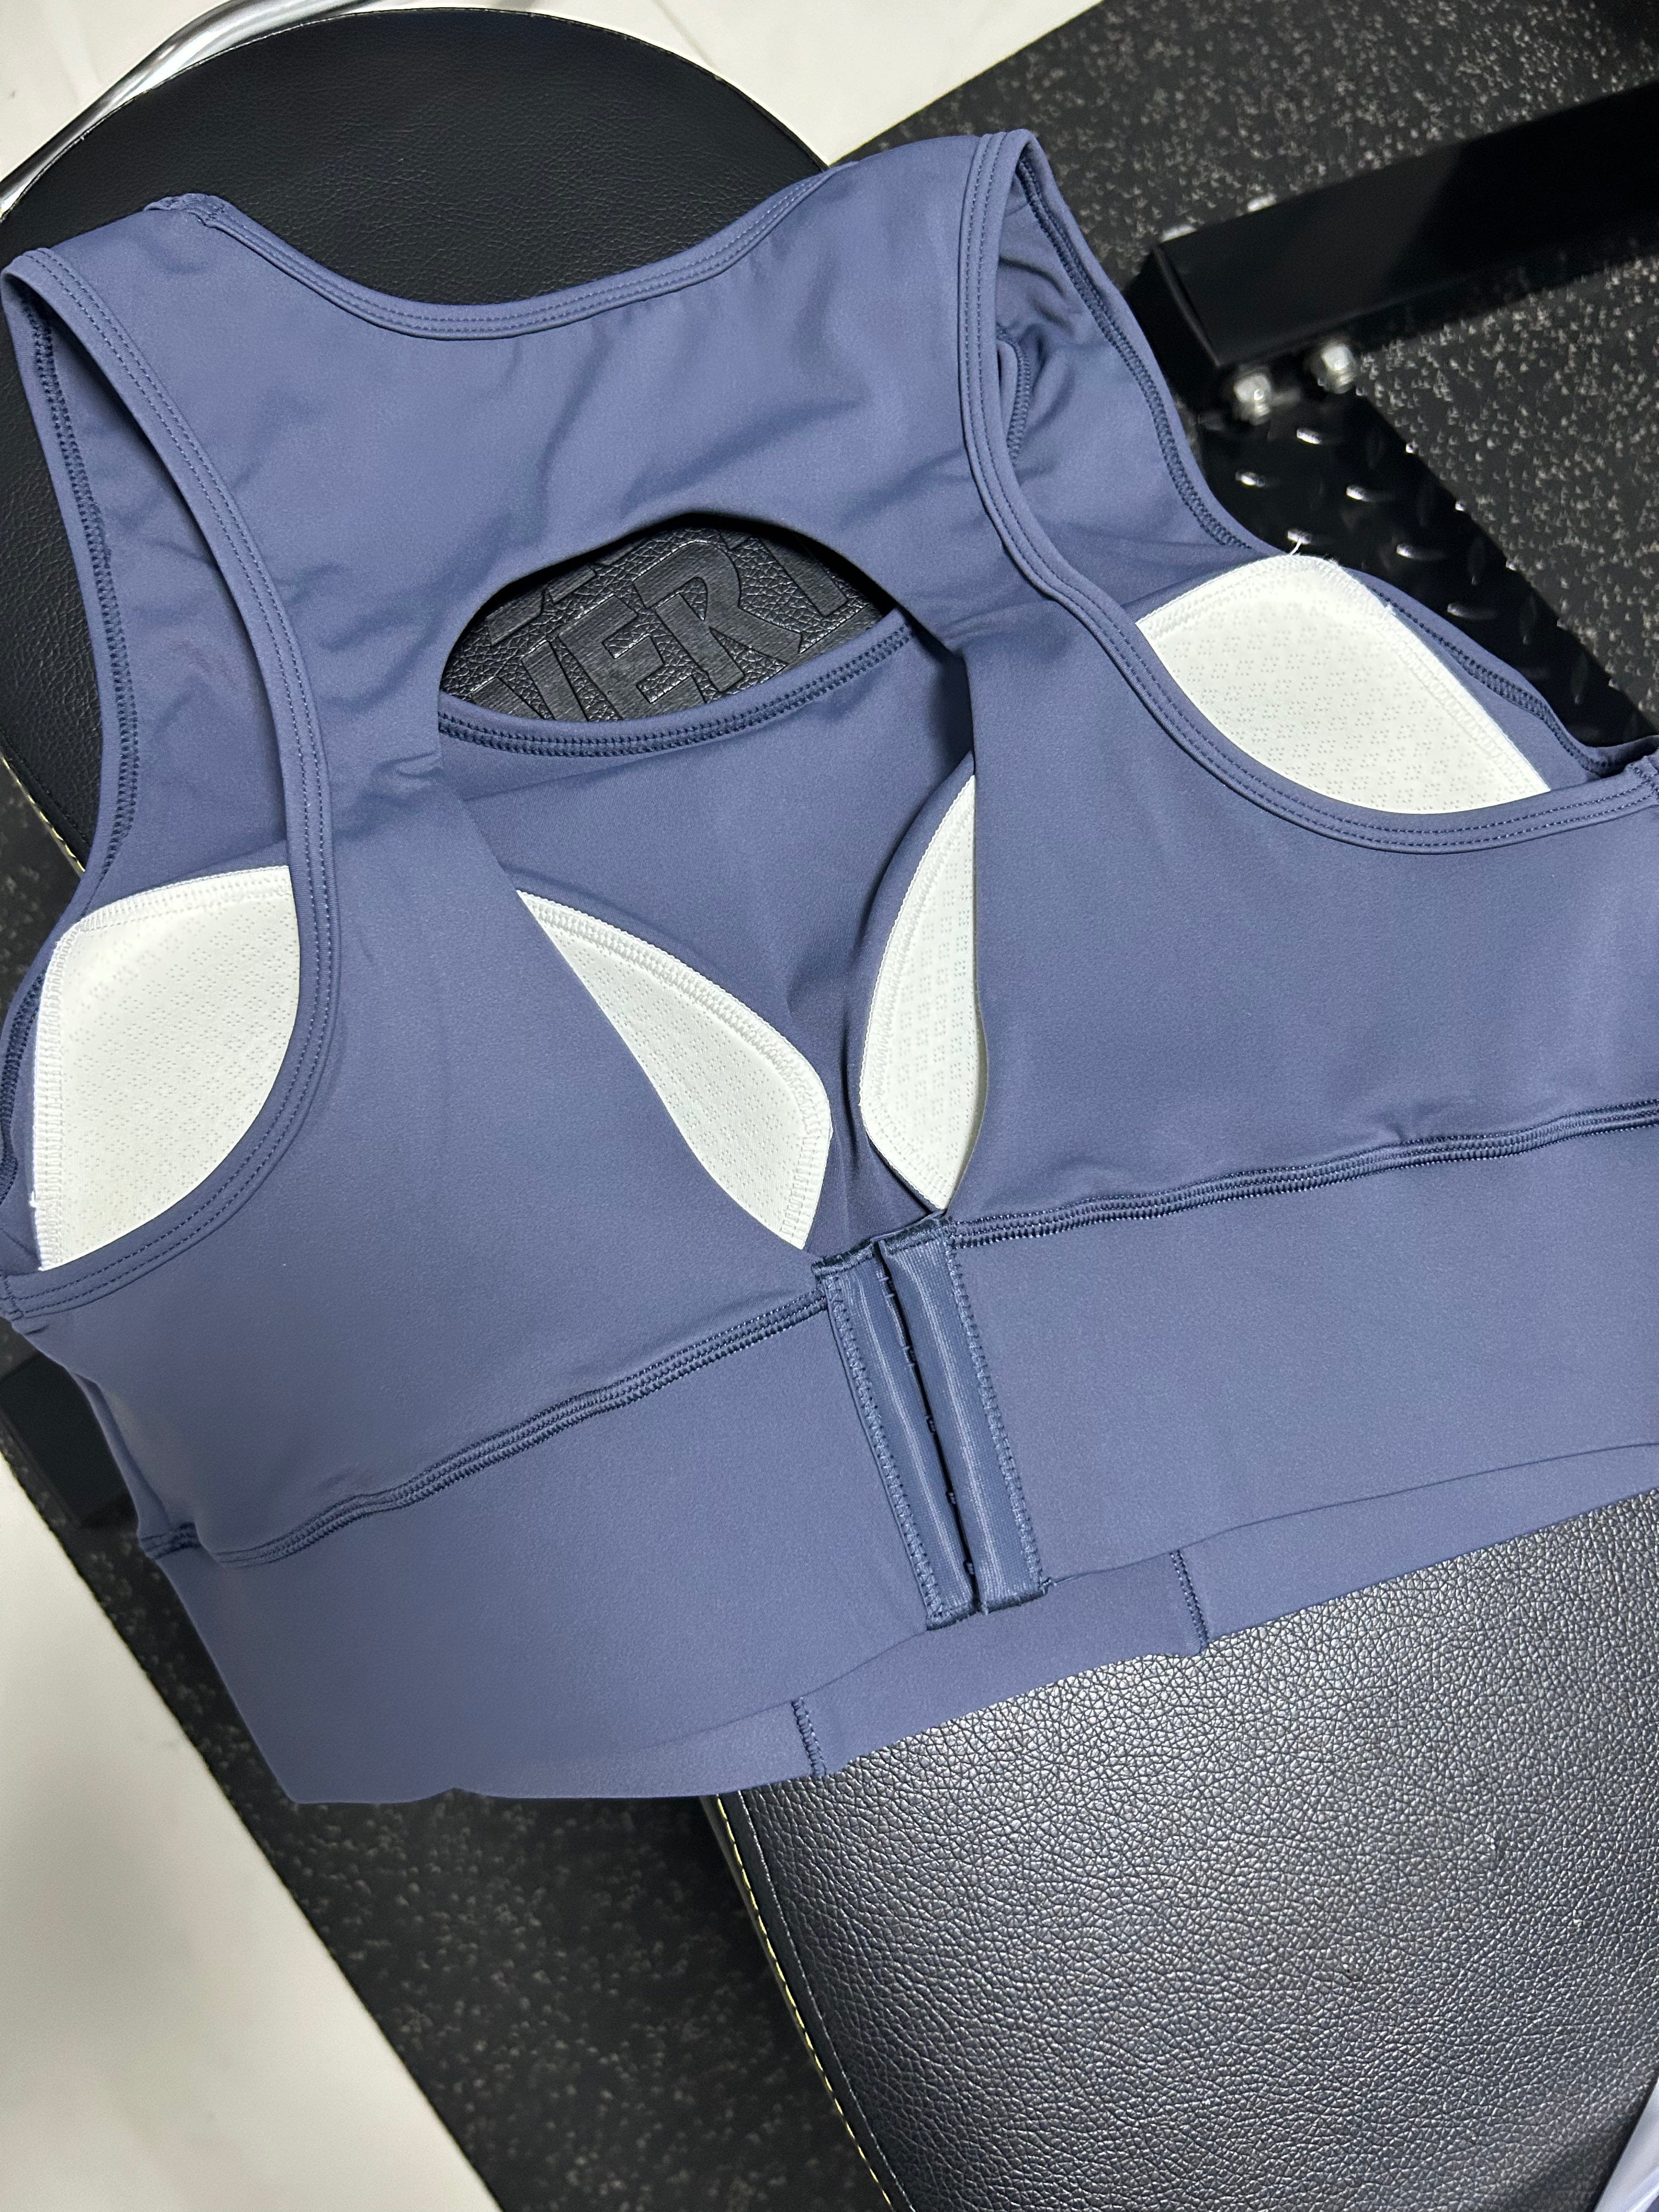 Everyday high impact open back built in padding clasp sports bra